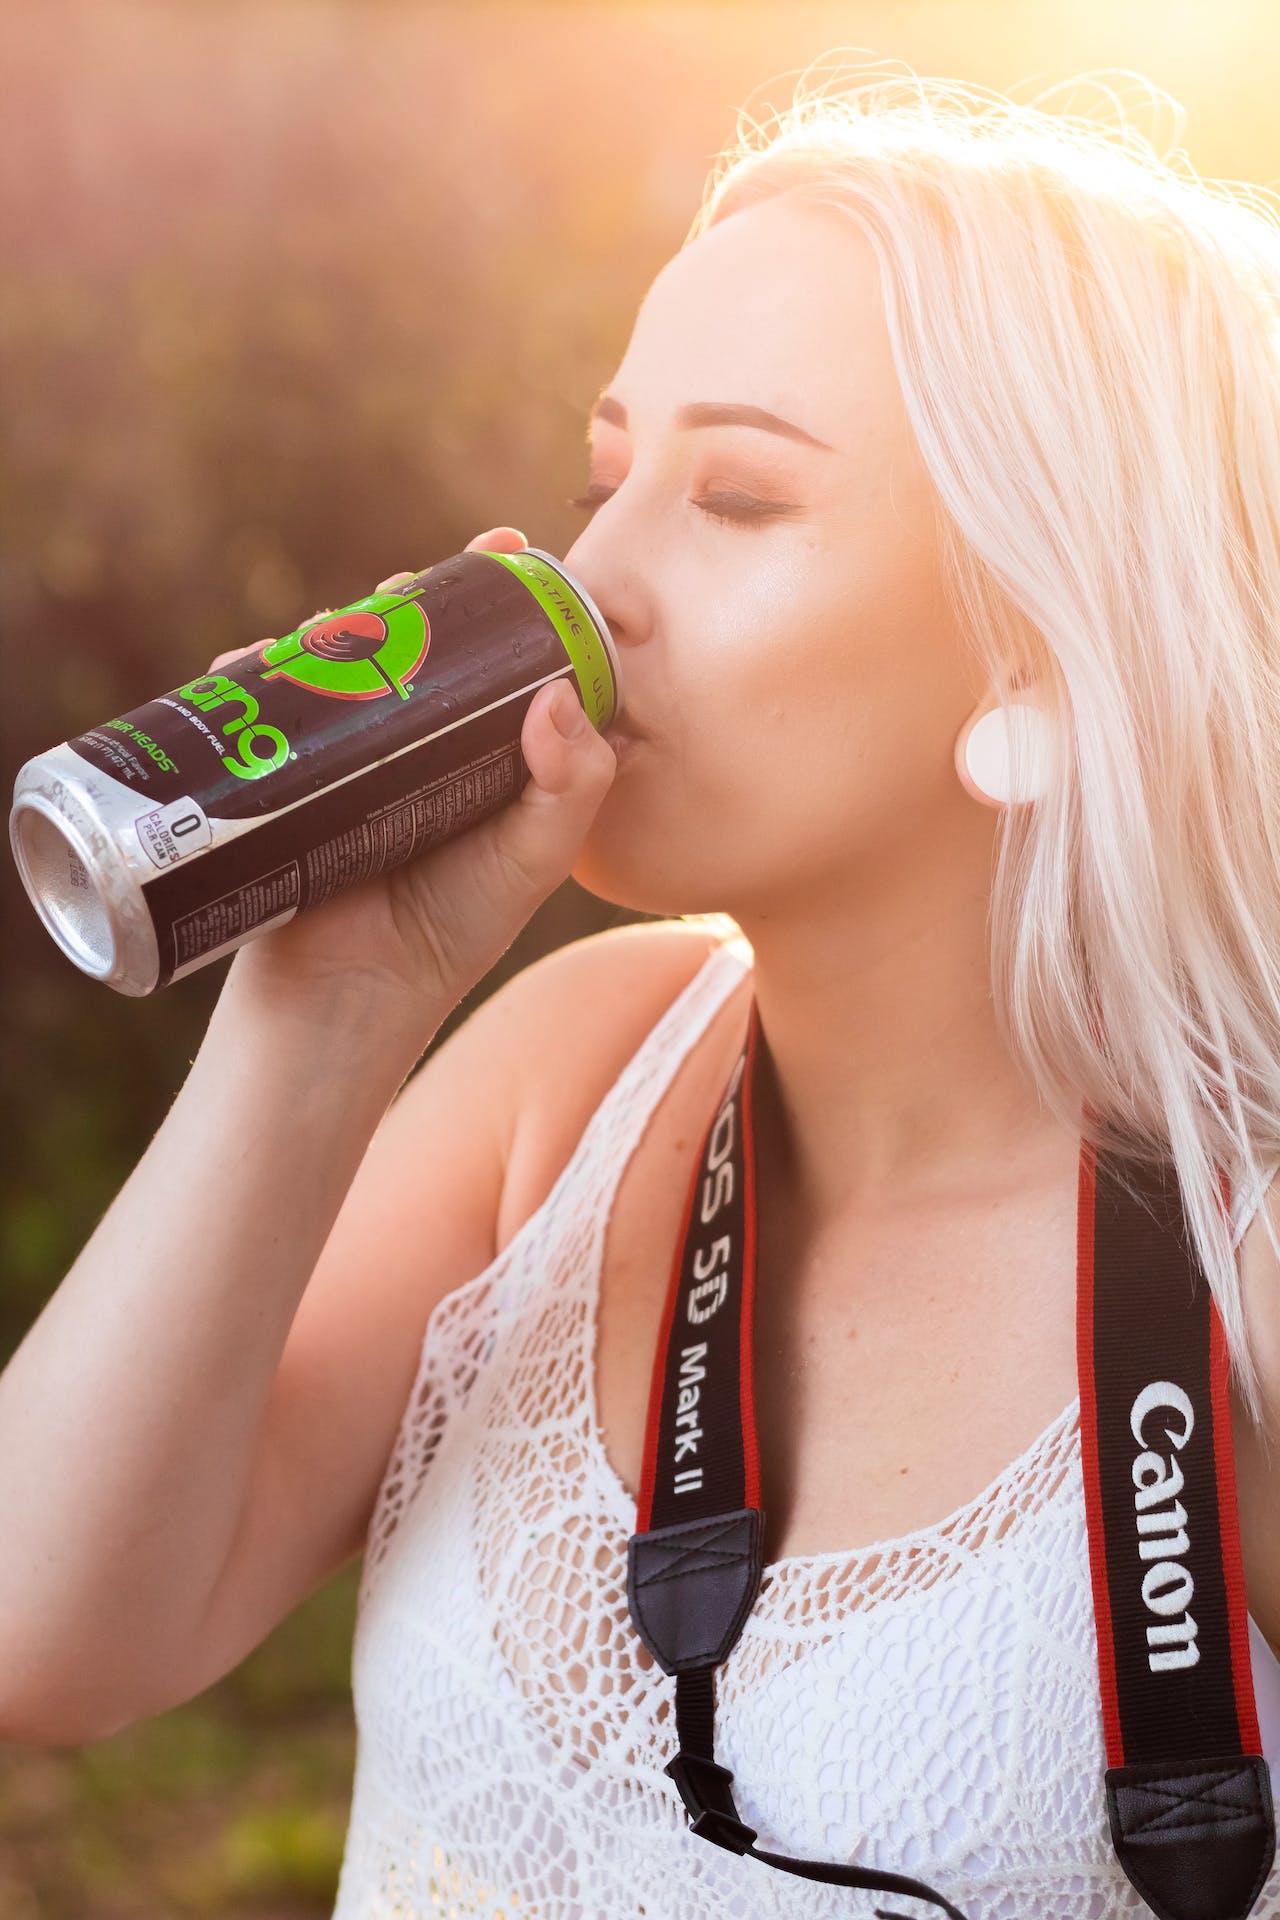 Columbia study: Energy drink ingredient taurine may boost health and slow aging